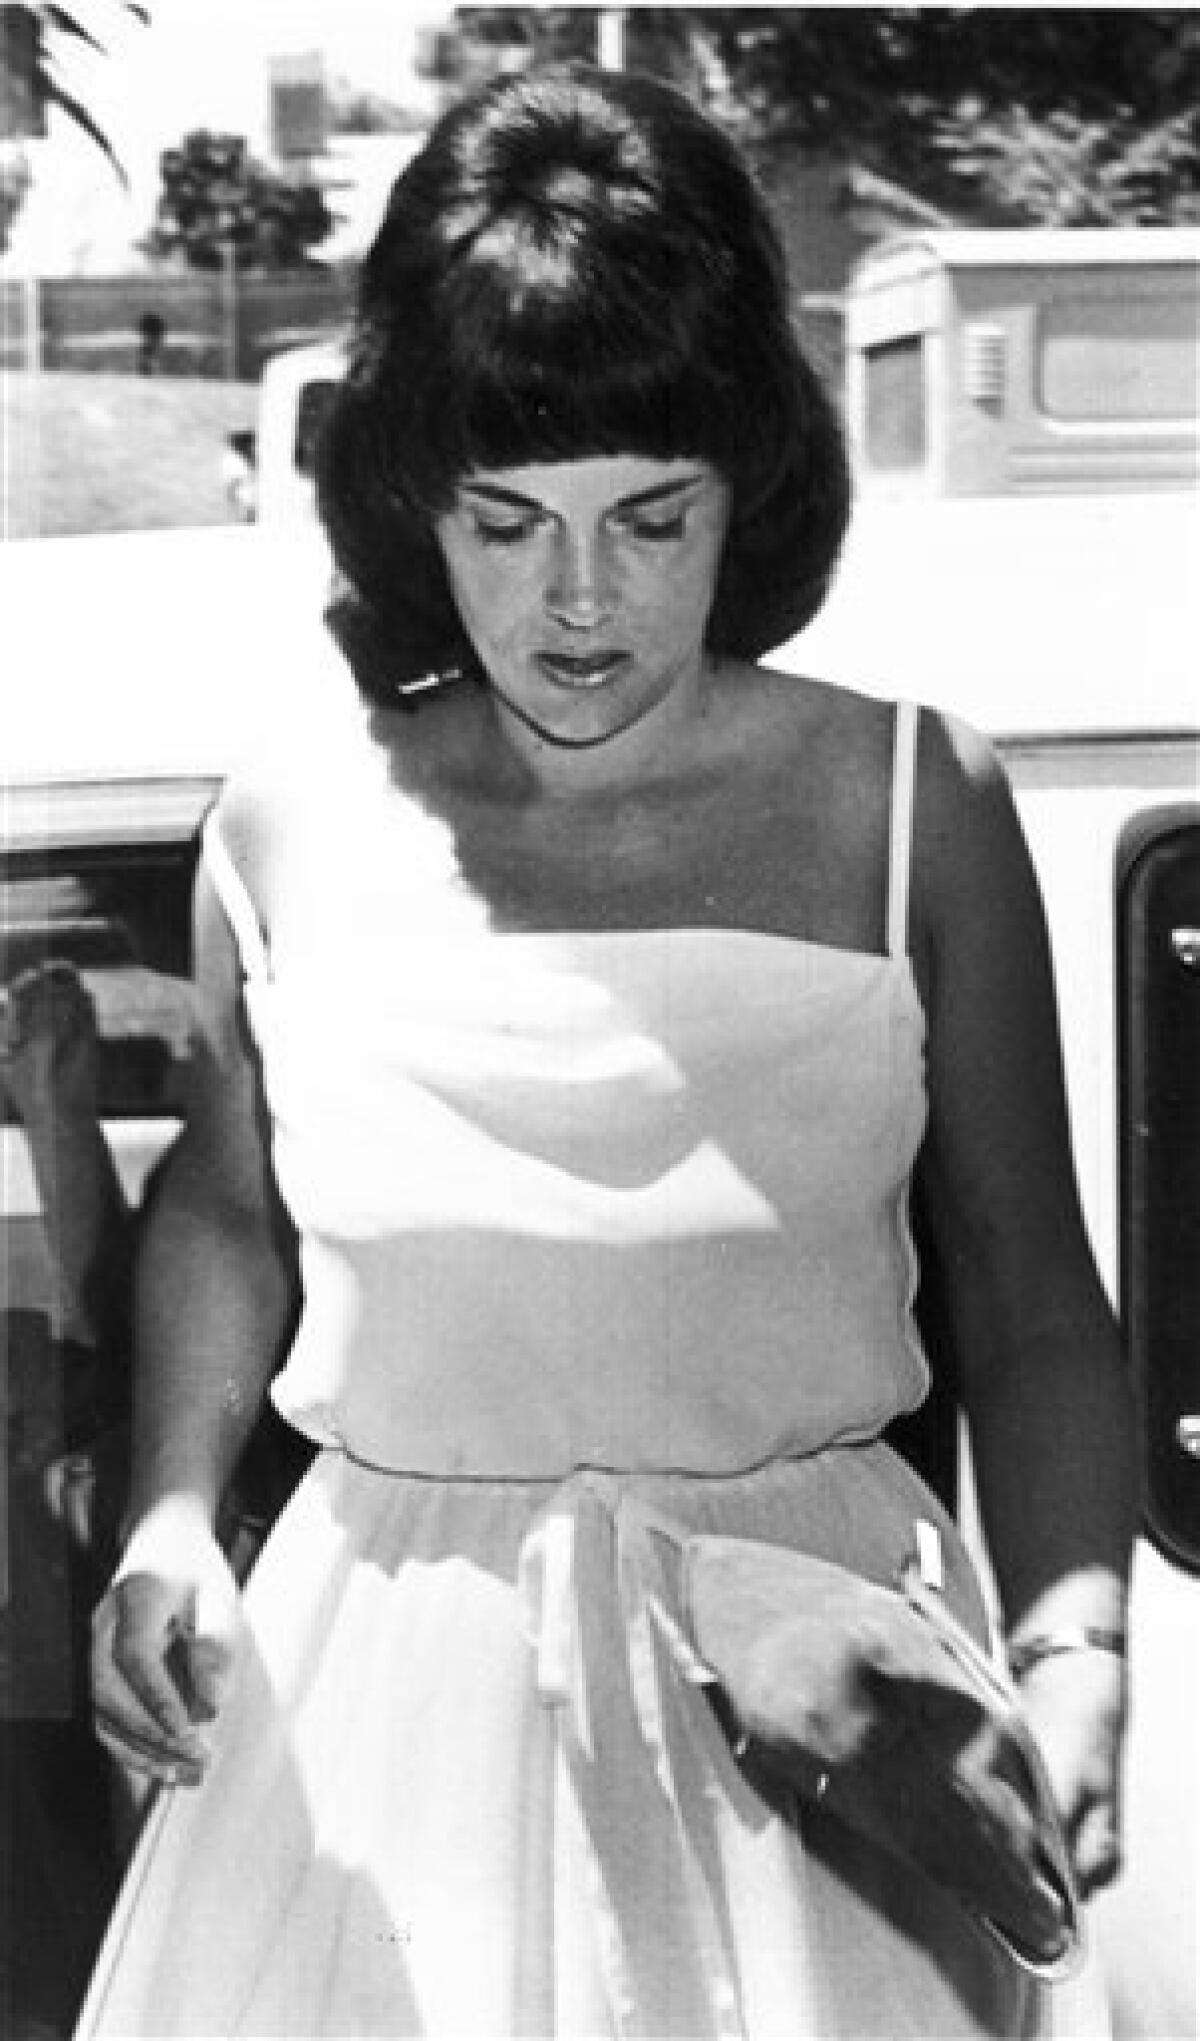 FILE - In this Feb. 2, 1982, file photo, Lindy Chamberlain appears outside Alice Springs courthouse. The Northern Territory coroner is opening a fourth inquest on Friday, Feb. 24, 2012 into the case of Chamberlain's 9-week-old daughter Azaria, who vanished from her tent in the Australian Outback in 1980. Chamberlain, who was accused and later cleared of killing Azaria, said a dingo took the baby. (AP Photo/File)